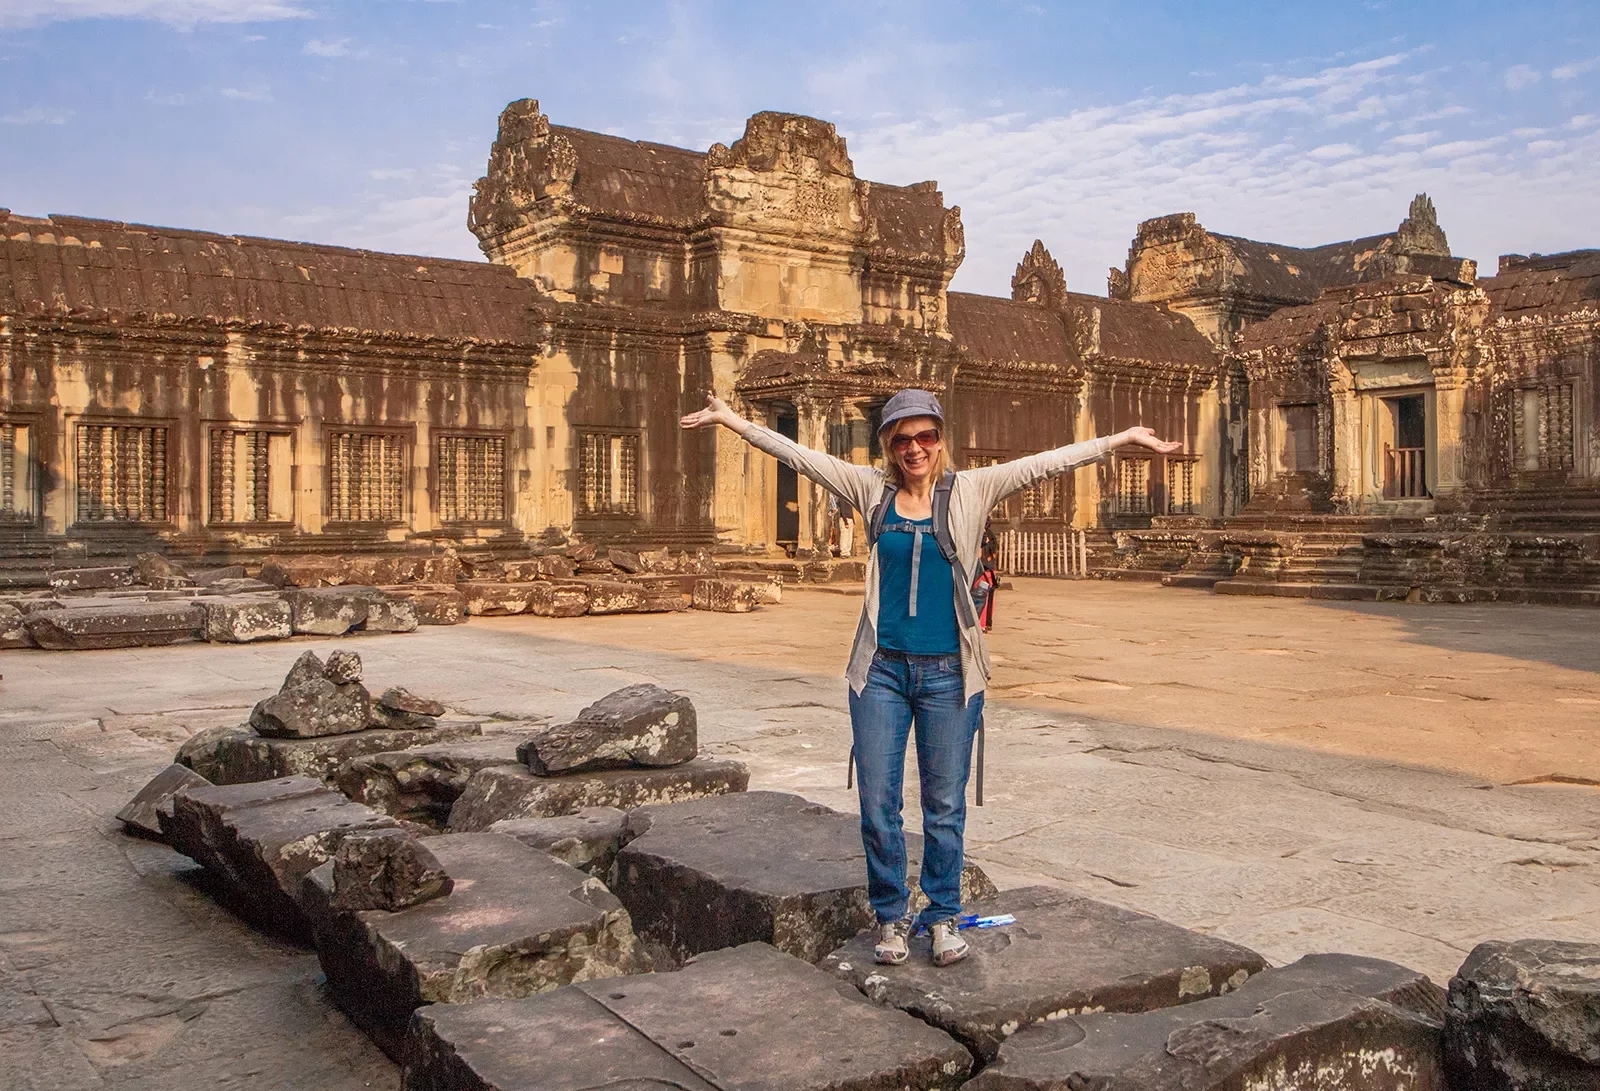 Person posing with arms outstretched in Angkor Wat